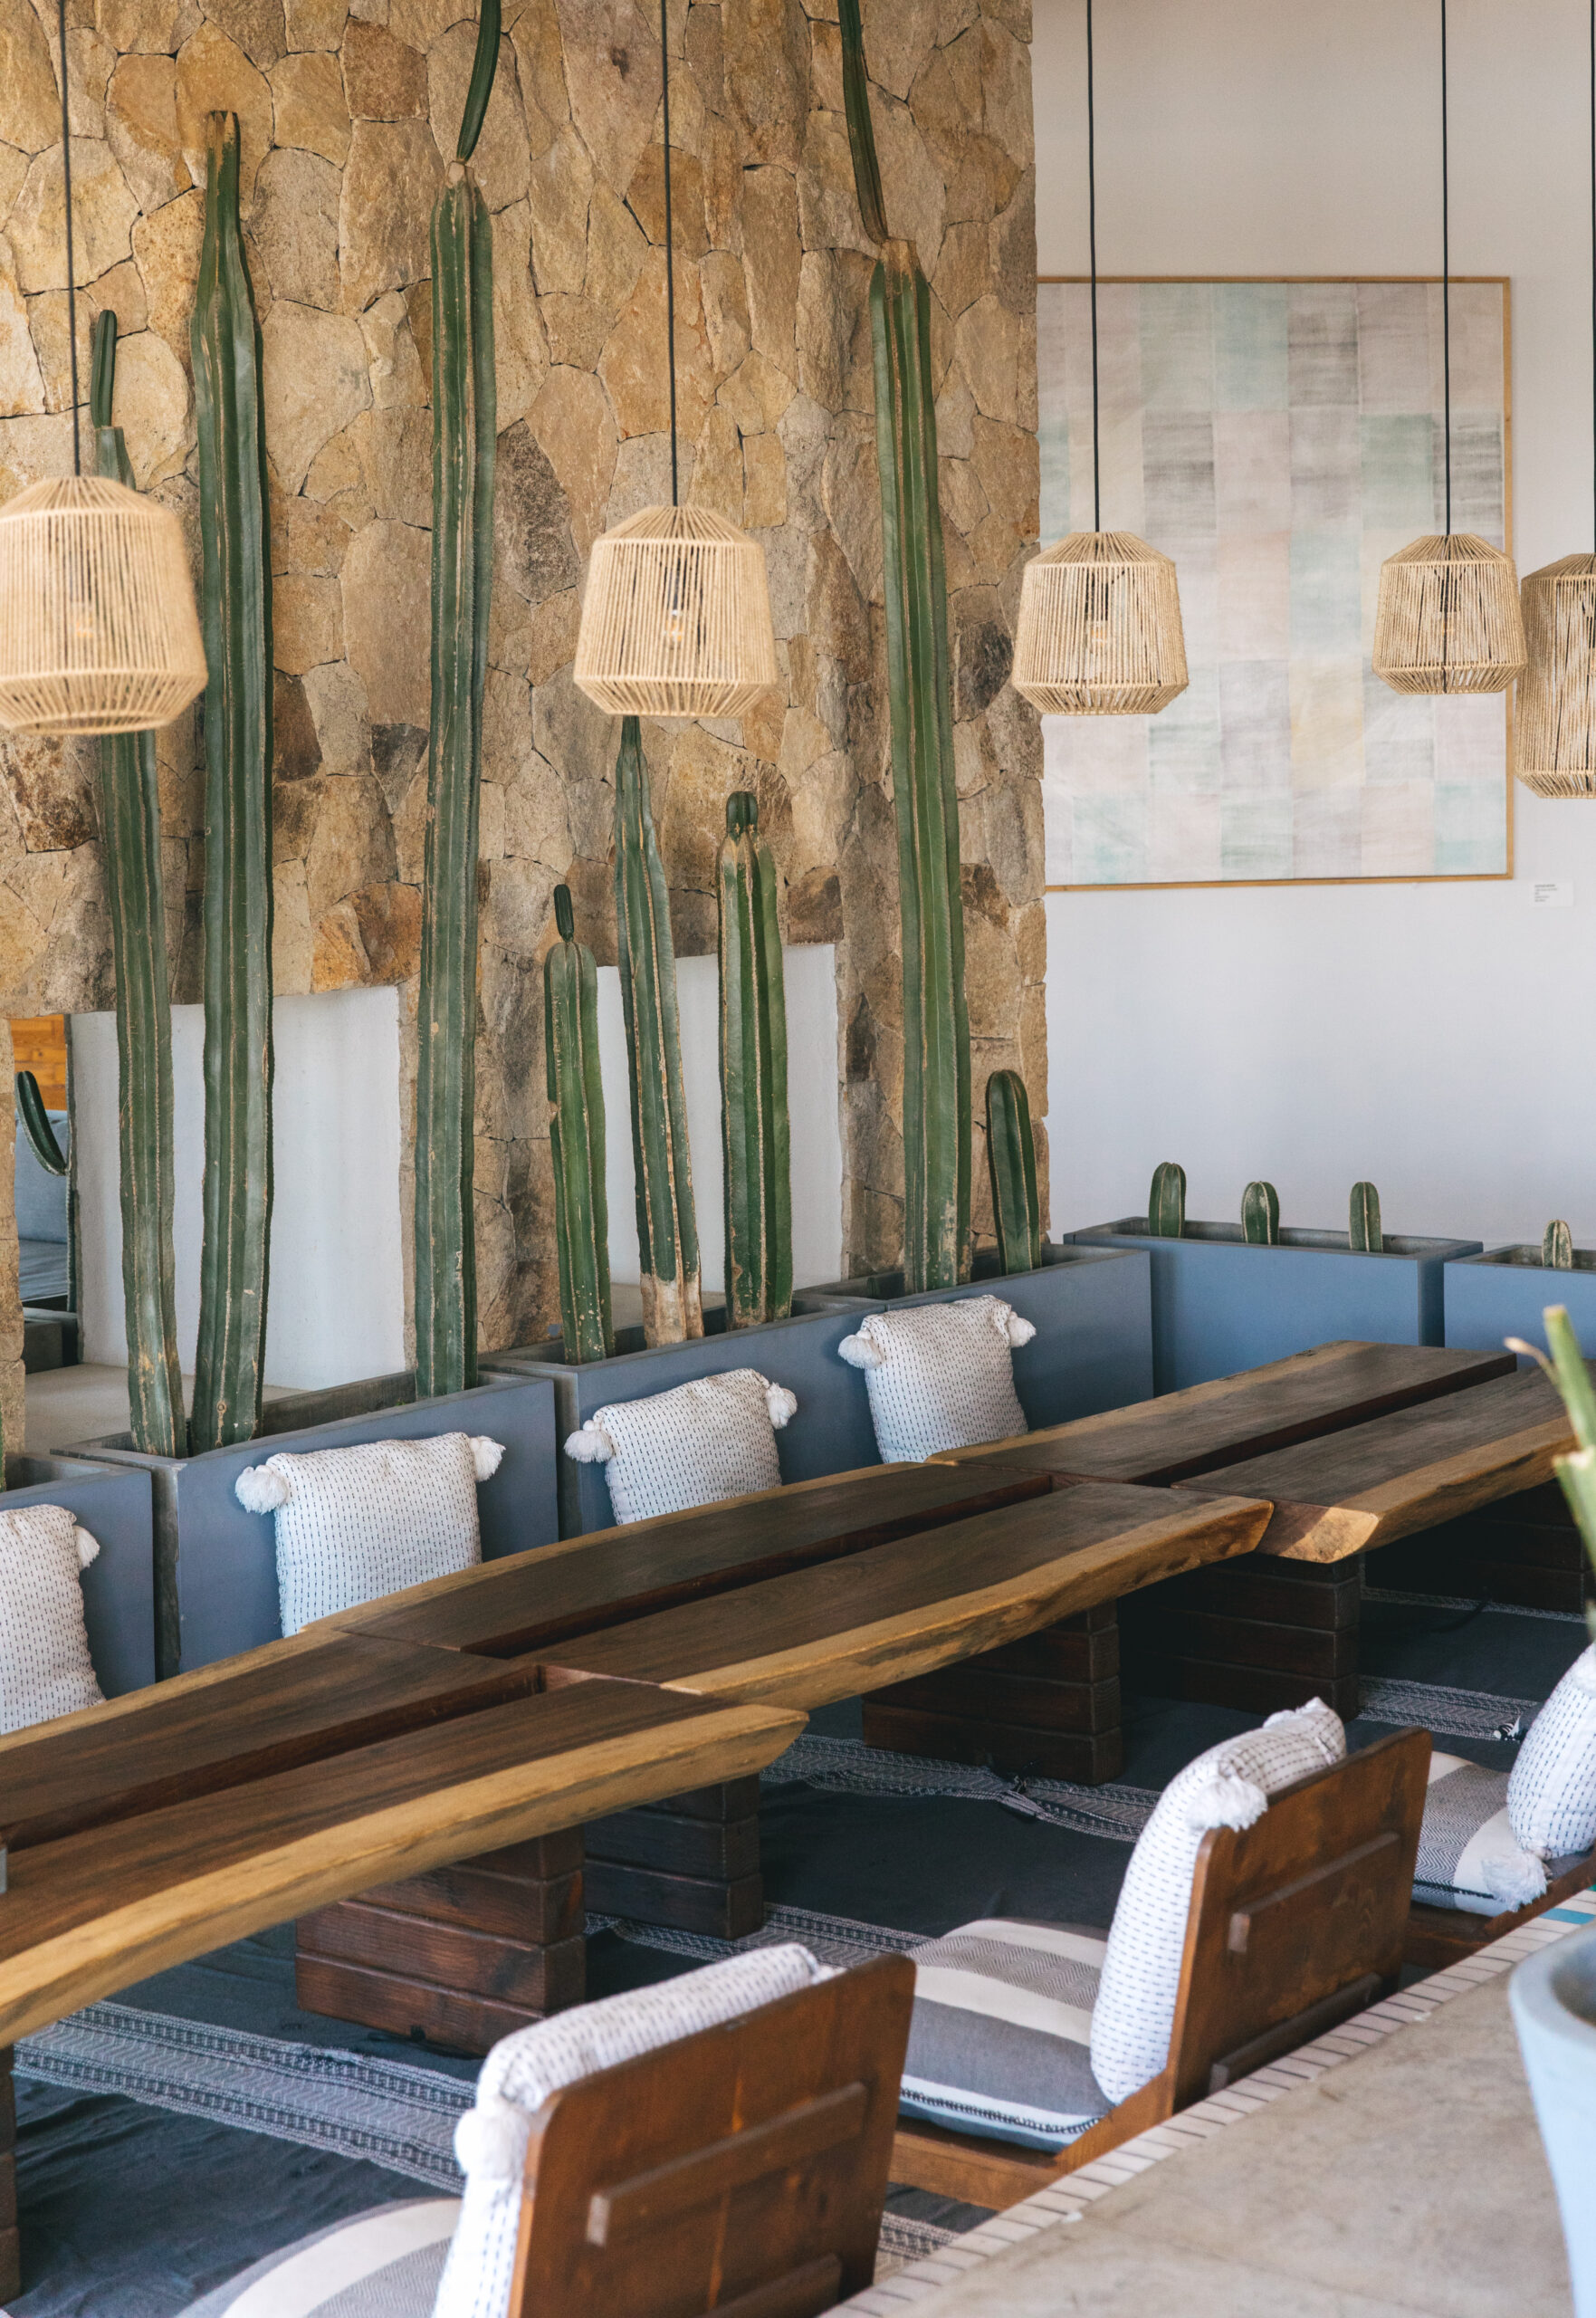 Modern Mexican interior design. Hotel El Ganzo. Low raw wooden tables with cozy floor seating. Ratan lanterns and cactus decor. Natural interiors.